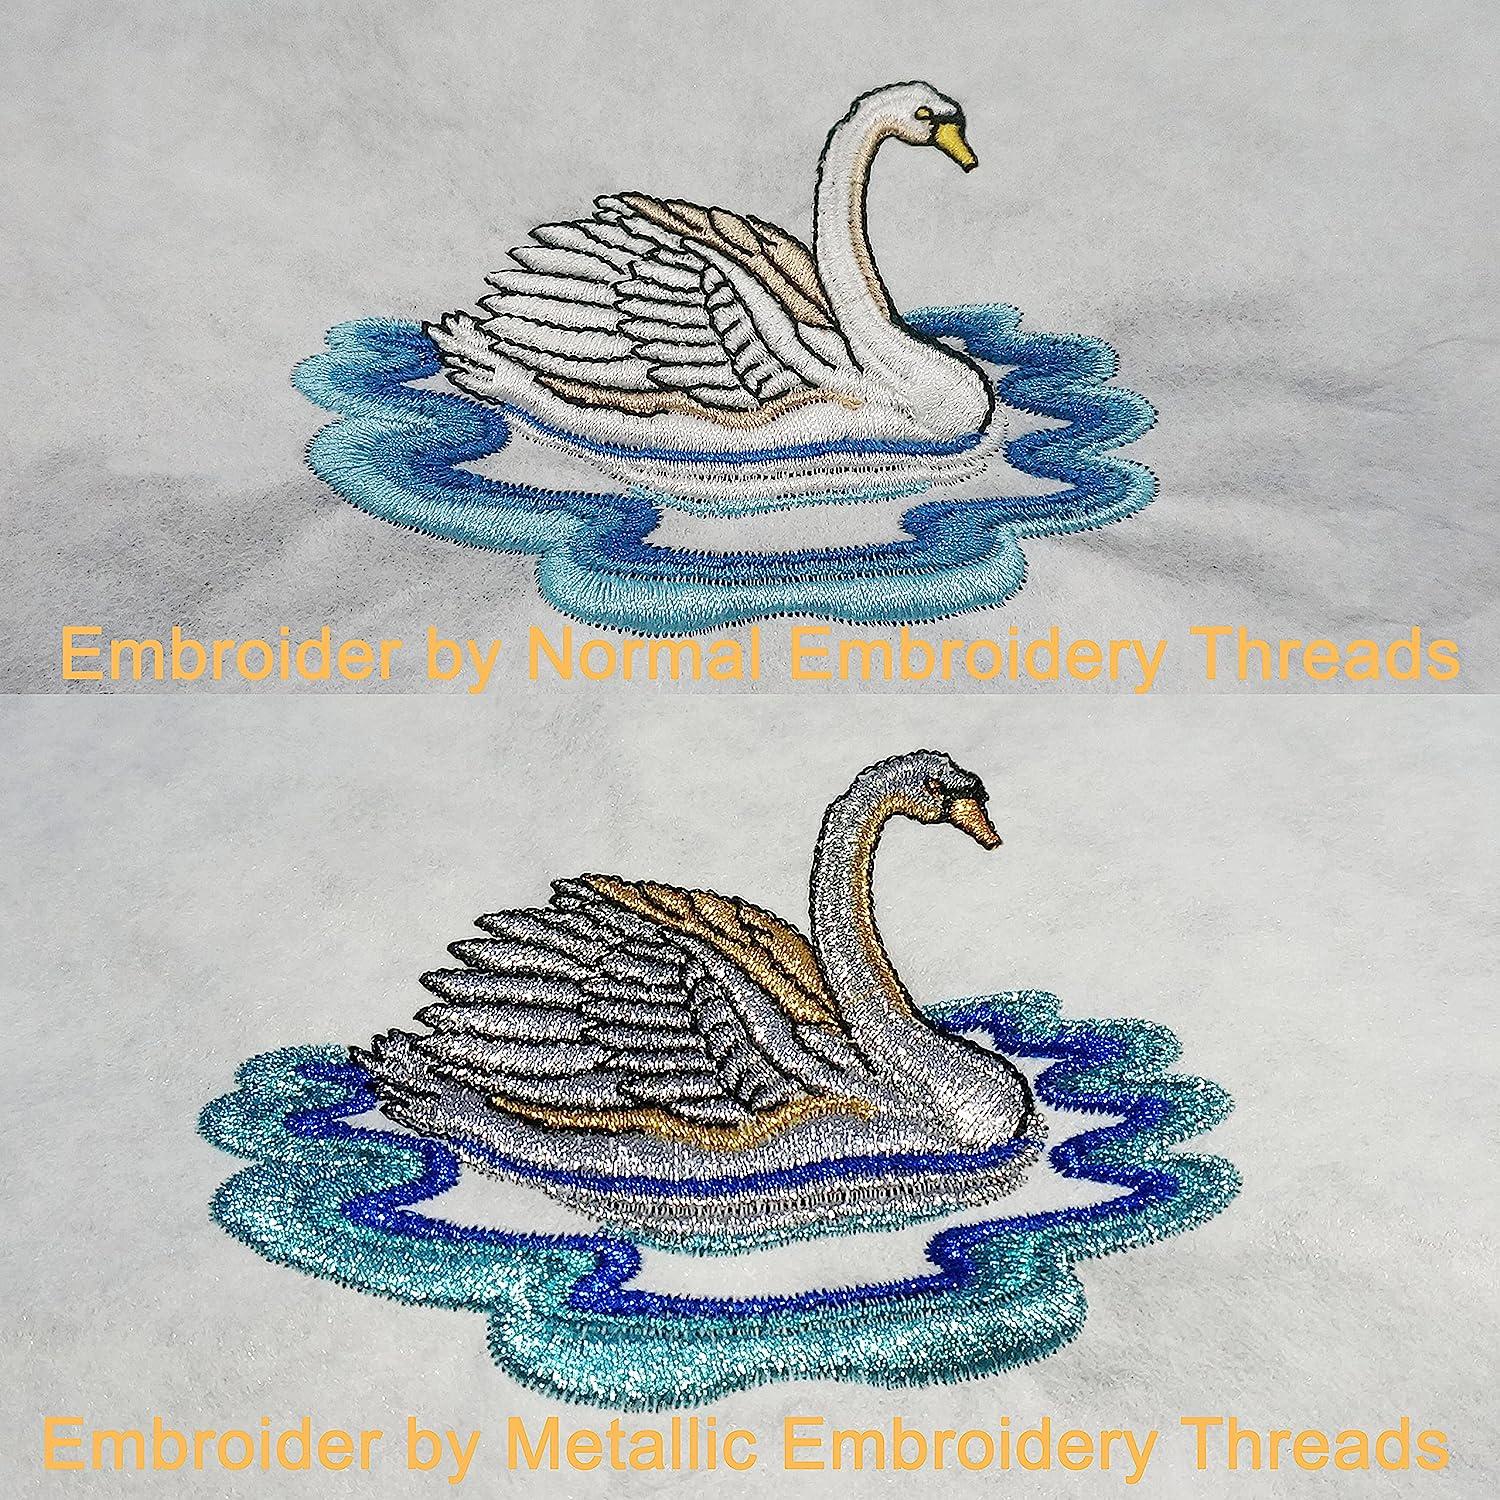 New brothread 4pcs (2 Gold+2 Silver Colors) Metallic Embroidery